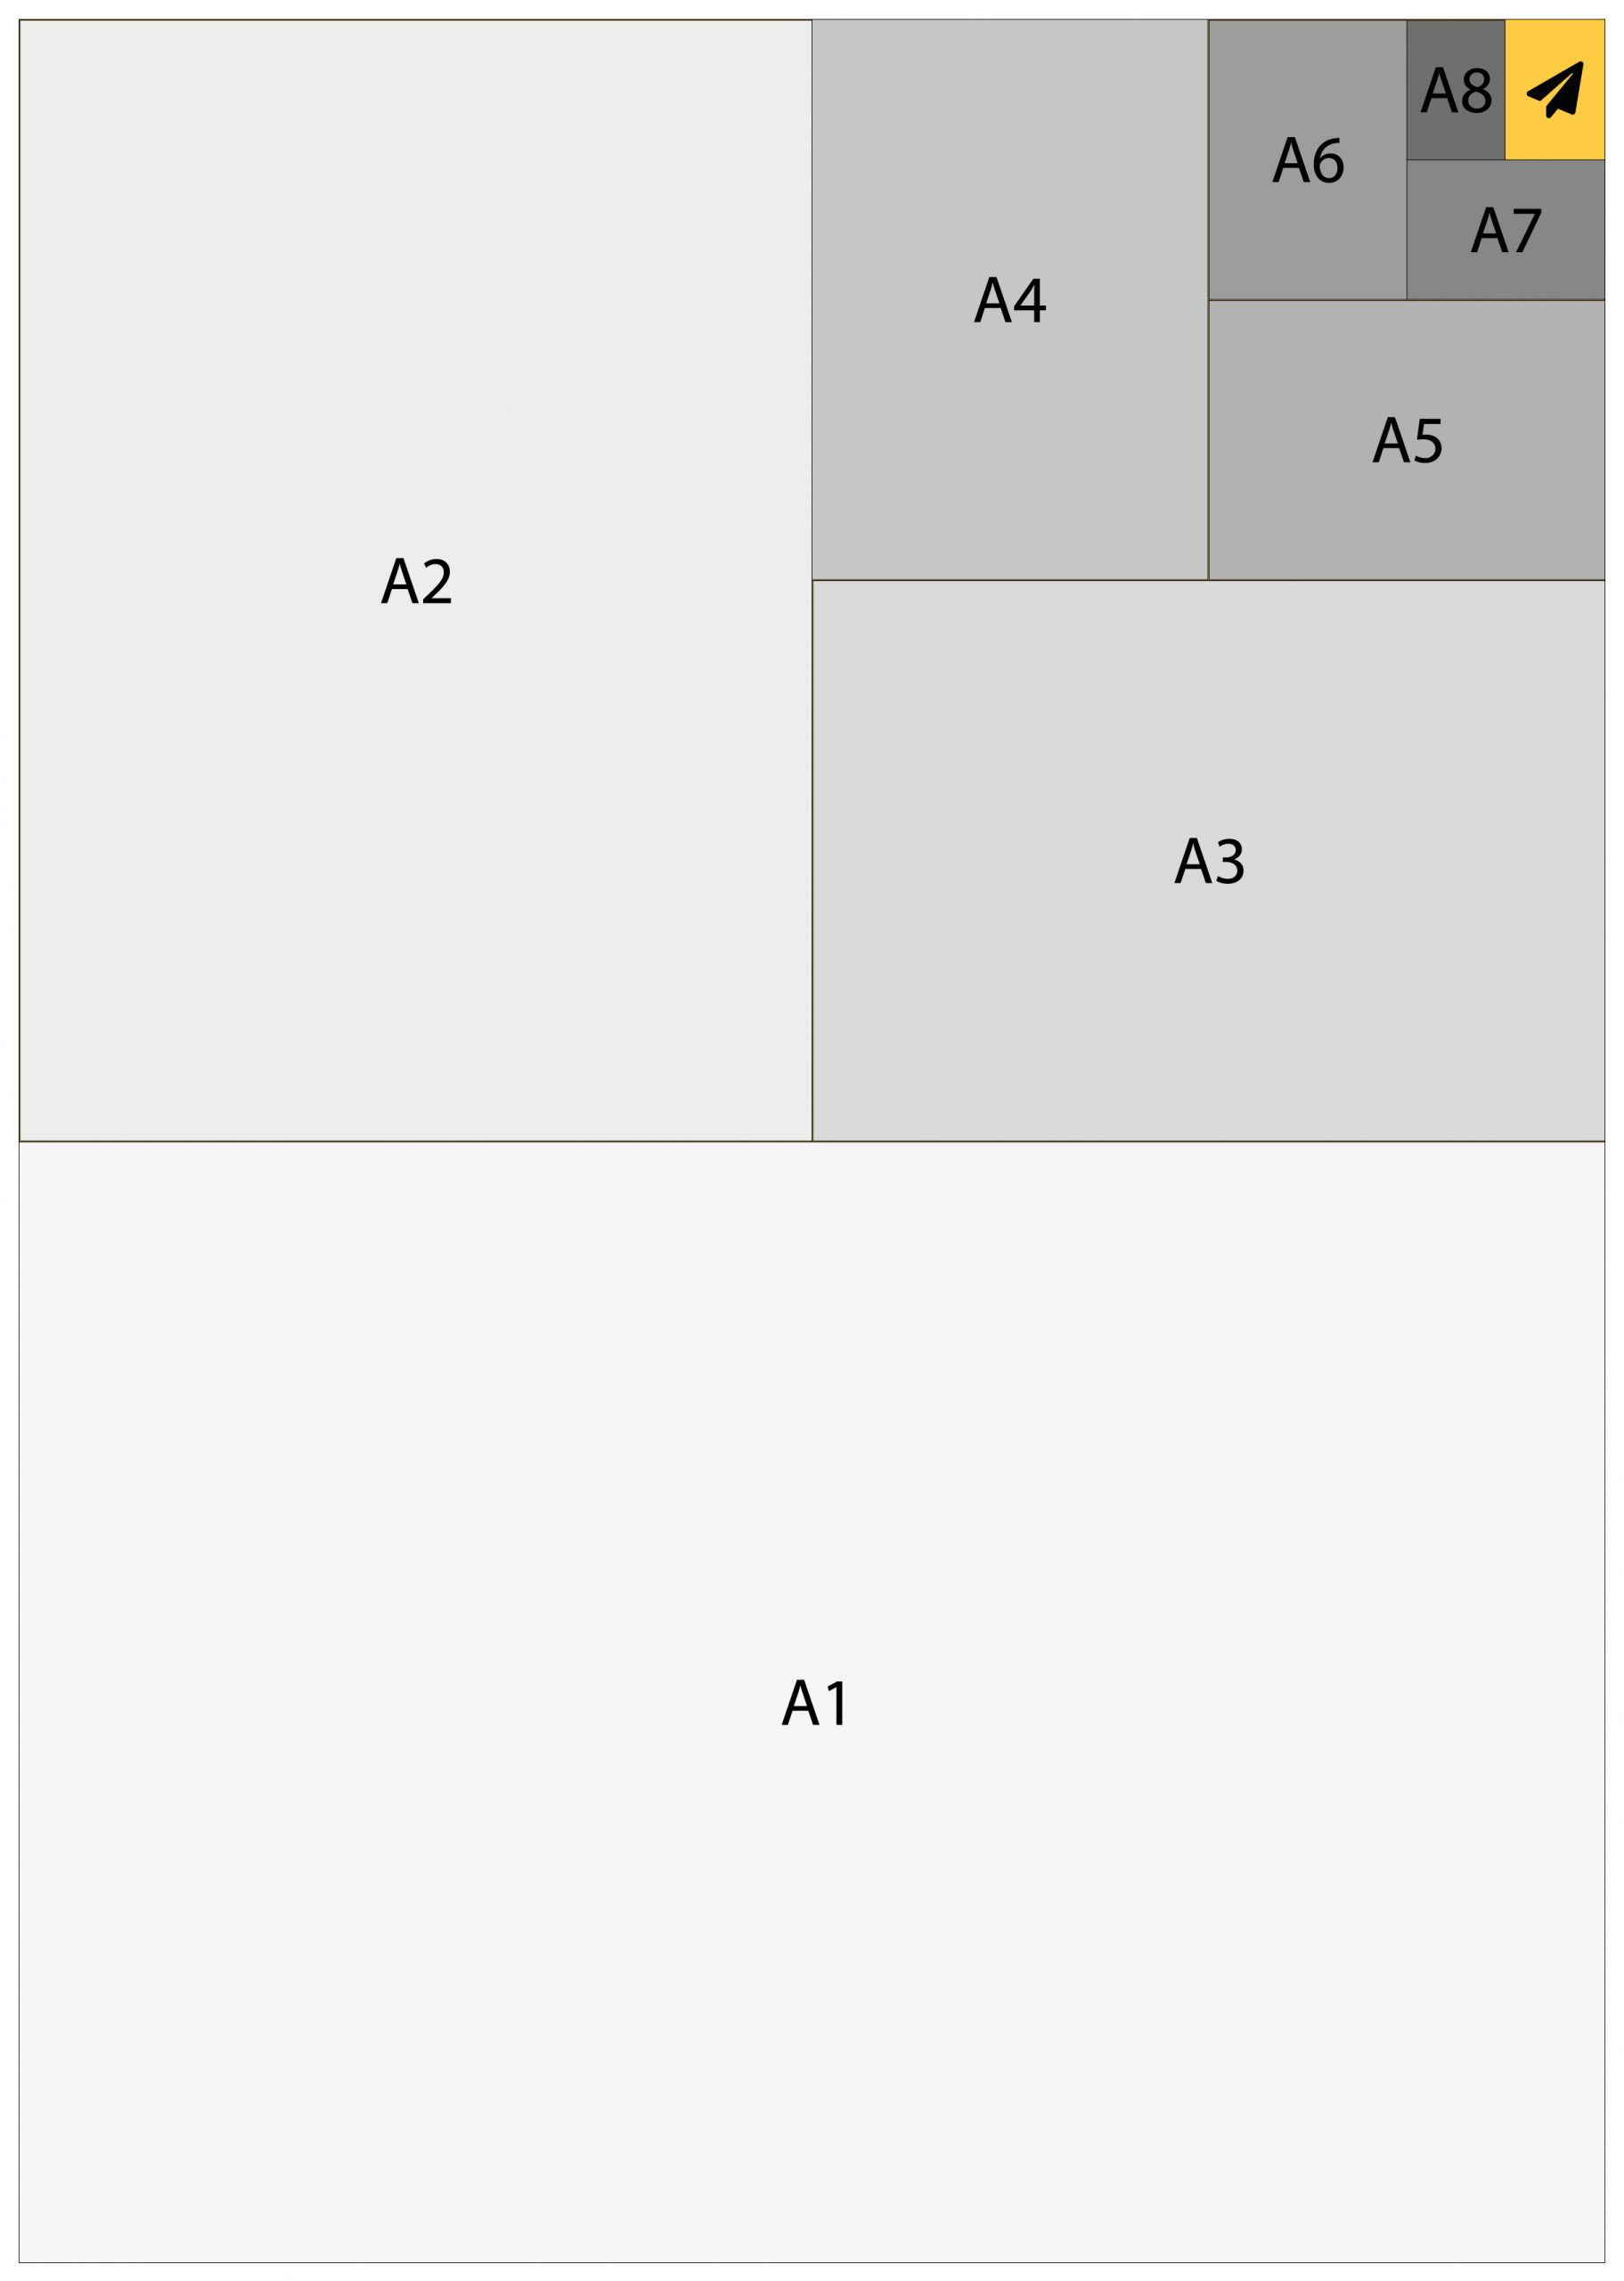 Paper Sizes & Weights In 1x Simply Explained